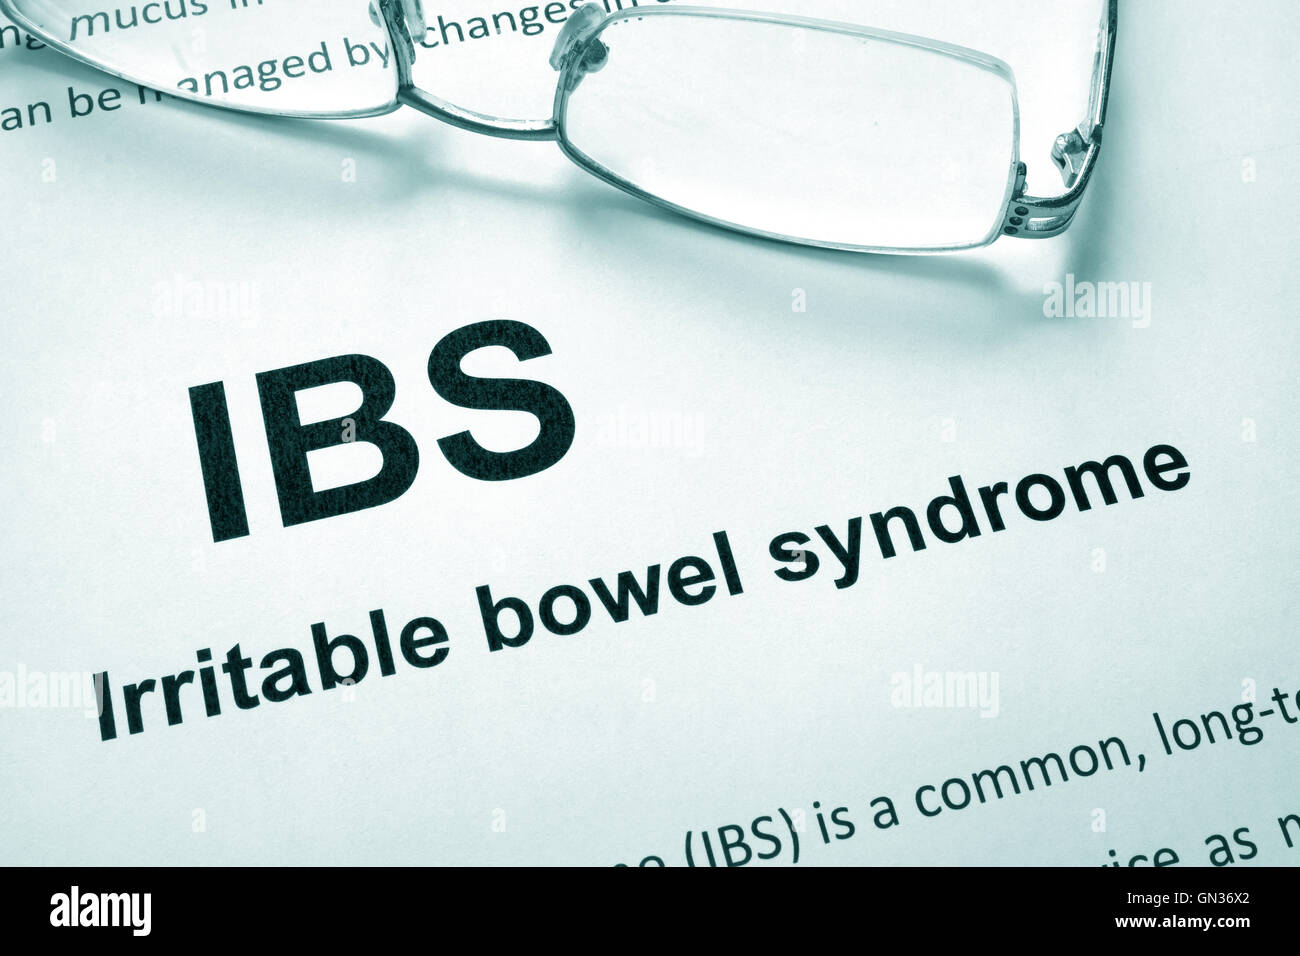 Paper with words Irritable bowel syndrome (IBS) and glasses. Stock Photo